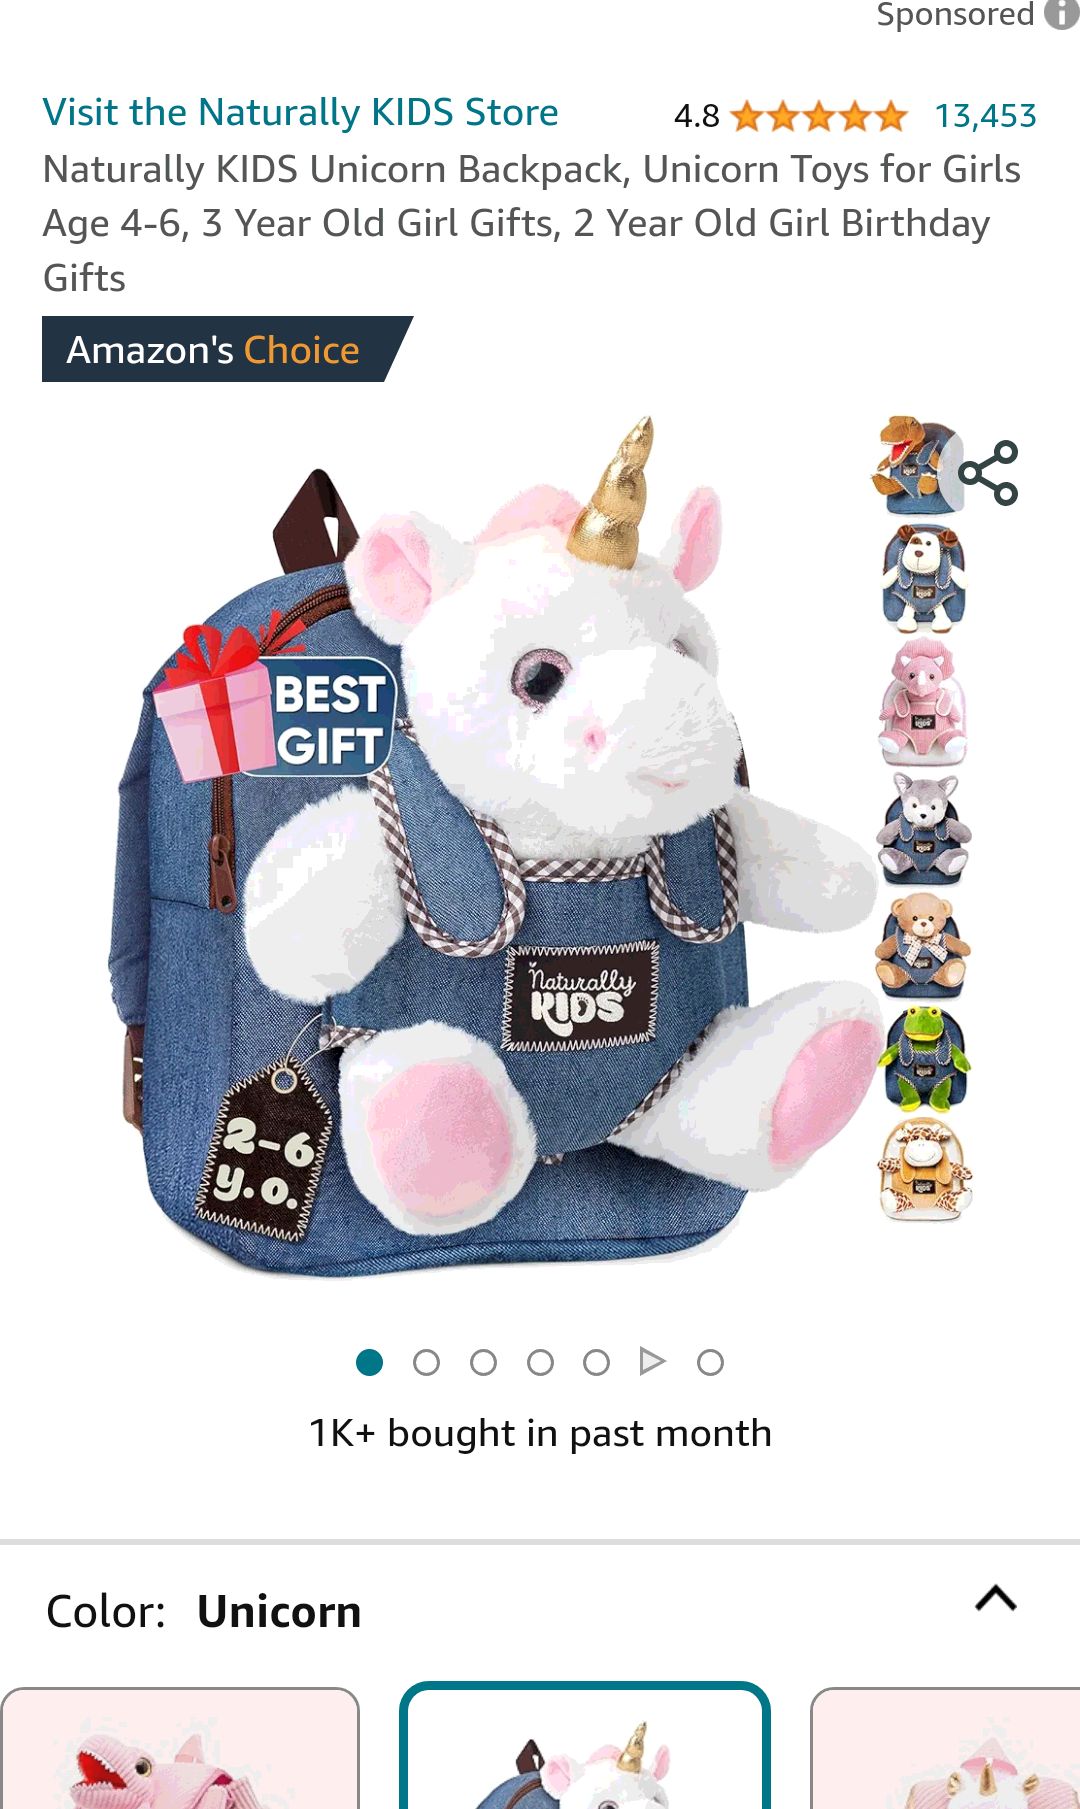 Naturally KIDS Unicorn Backpack, Unicorn Toys for Girls Age 4-6, 3 Year Old Girl Gifts, 2 Year Old Girl Birthday Gifts : Clothing, Shoes & Jewelry